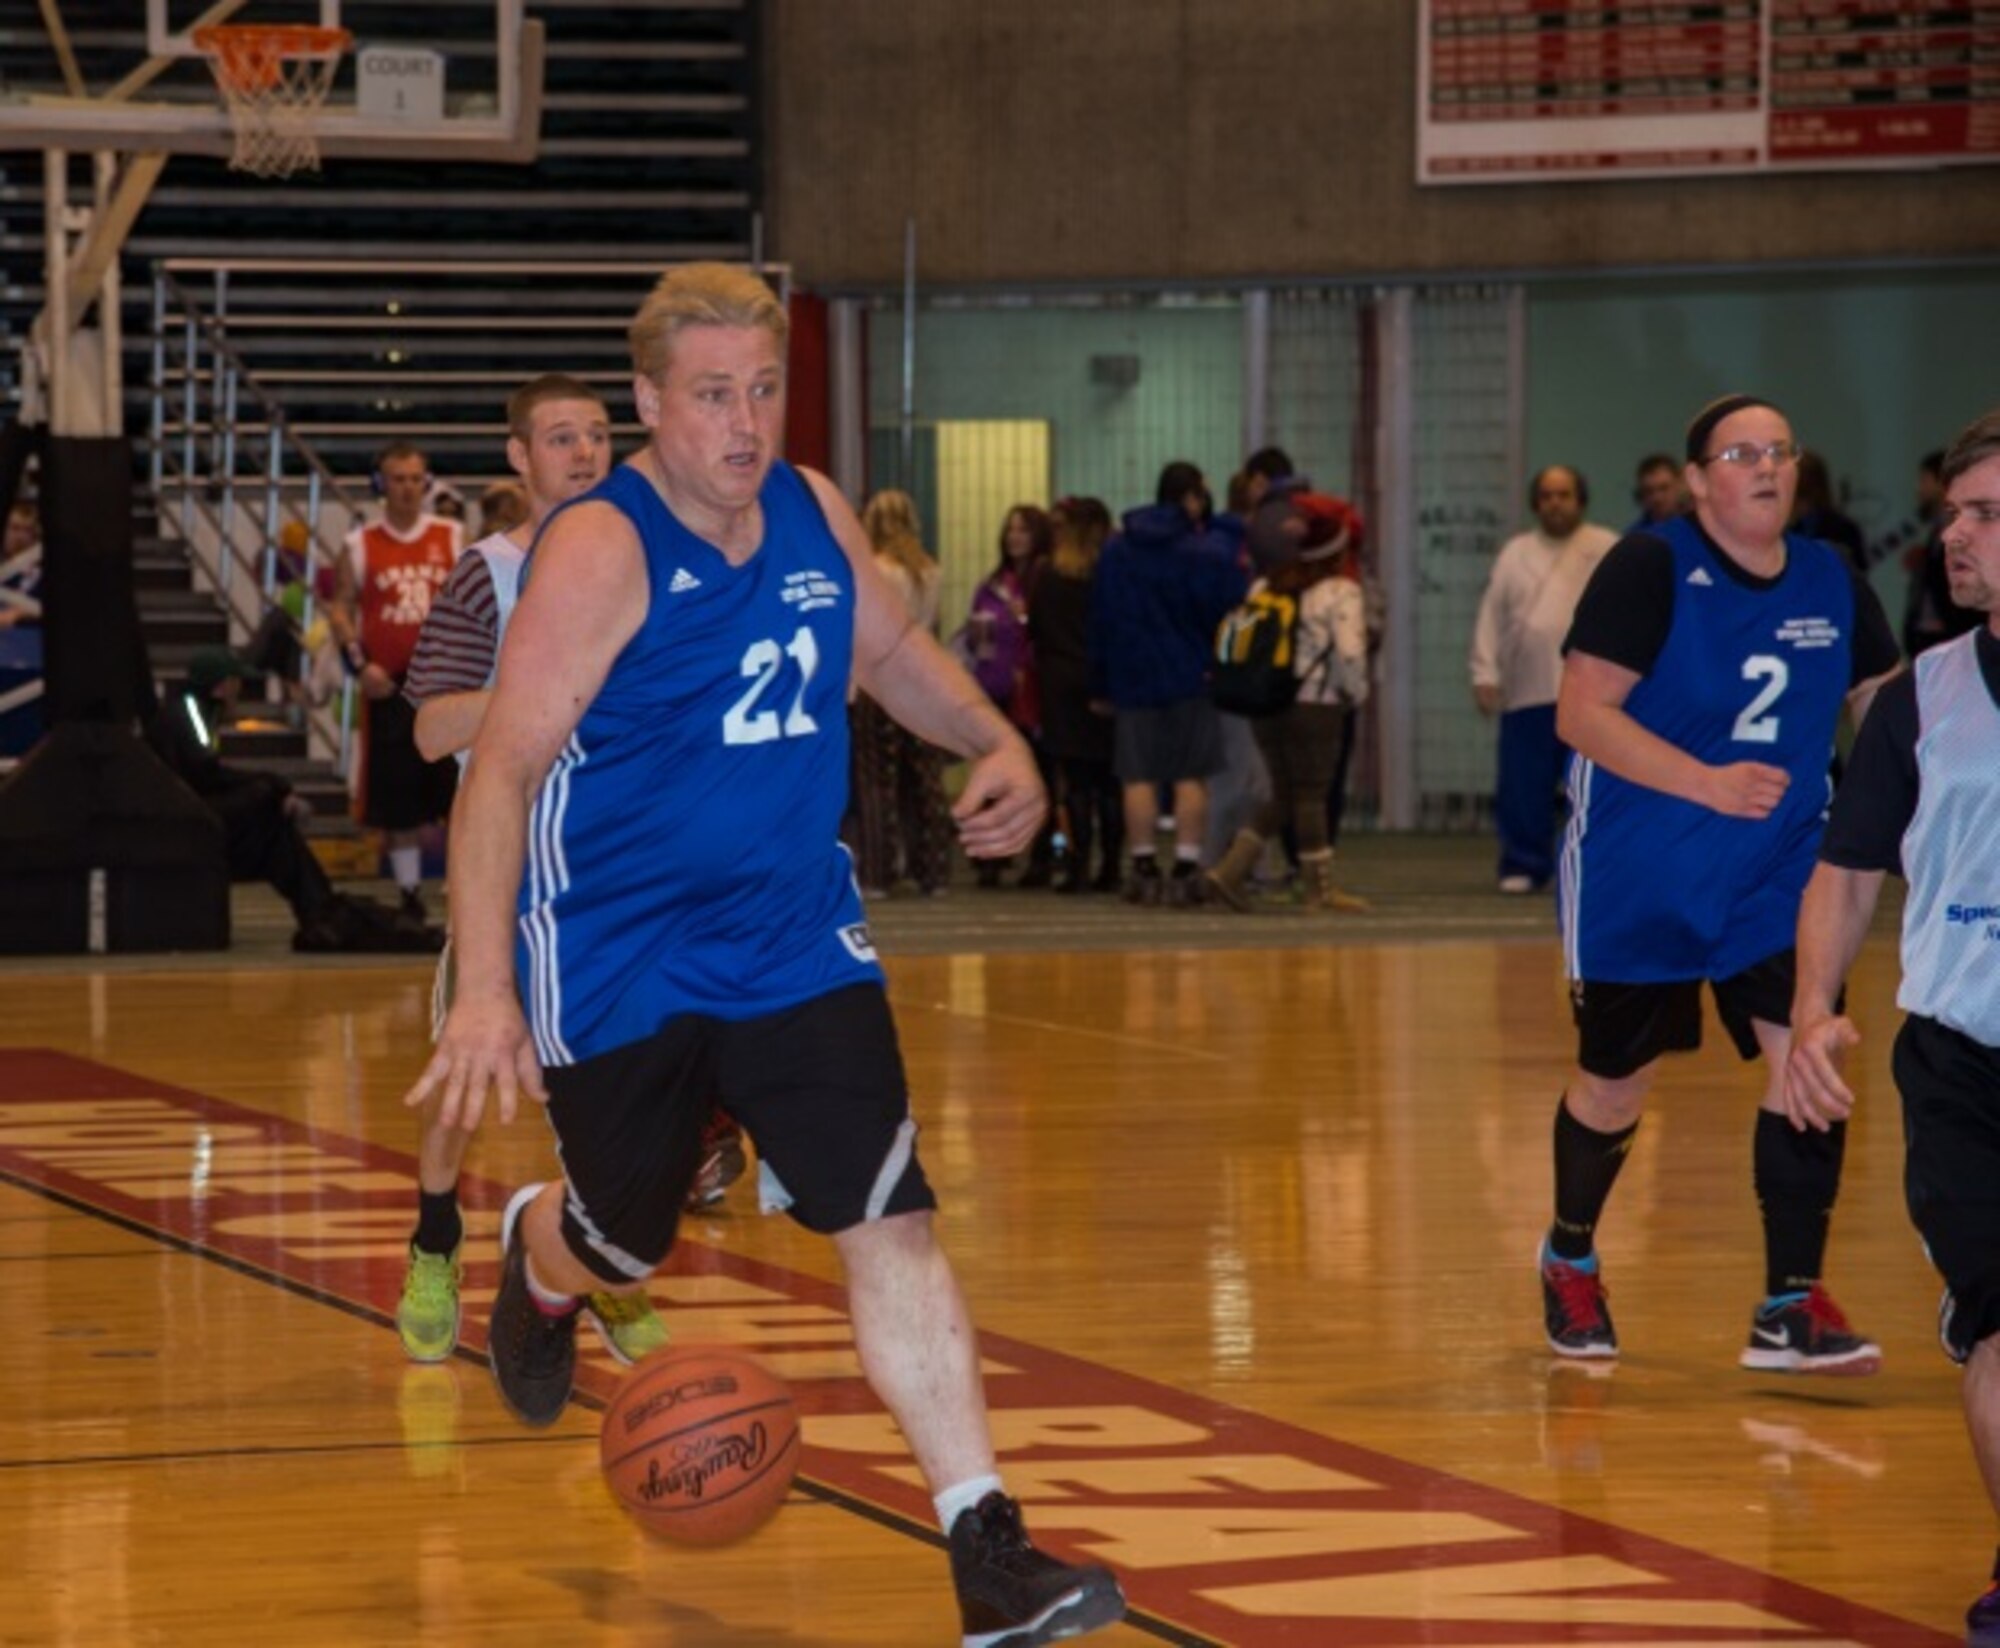 A member of the Jamestown Special Olympics team dribbles during a fastbreak during the North Dakota Special Olympics in Minot, N.D., March 4, 2016. Minot Air Force Base members volunteered at the event as referees and other volunter positions. (U.S. Air Force photo/Airman 1st Class Christian Sullivan)